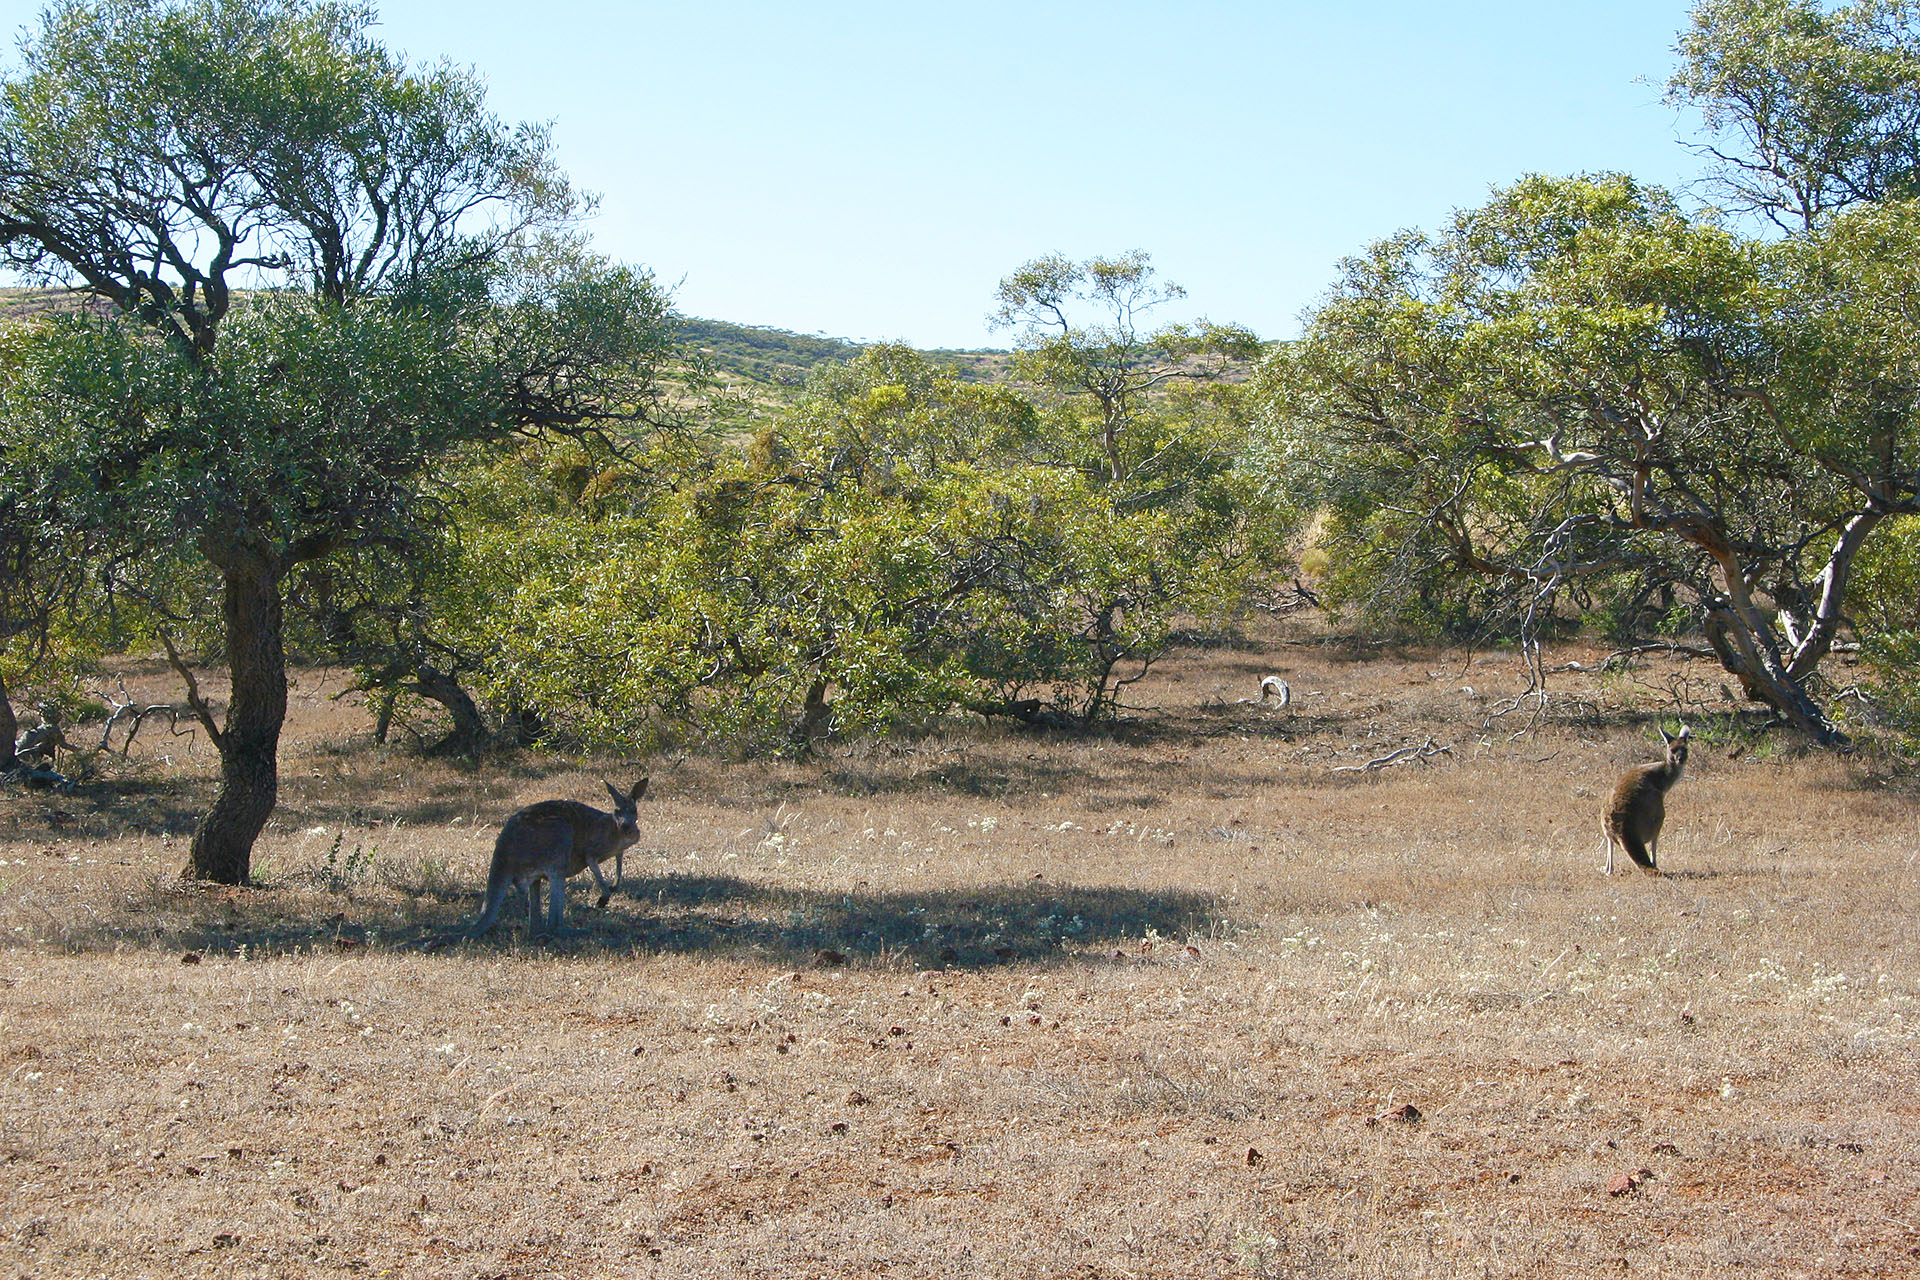 And there's still plenty of roos.